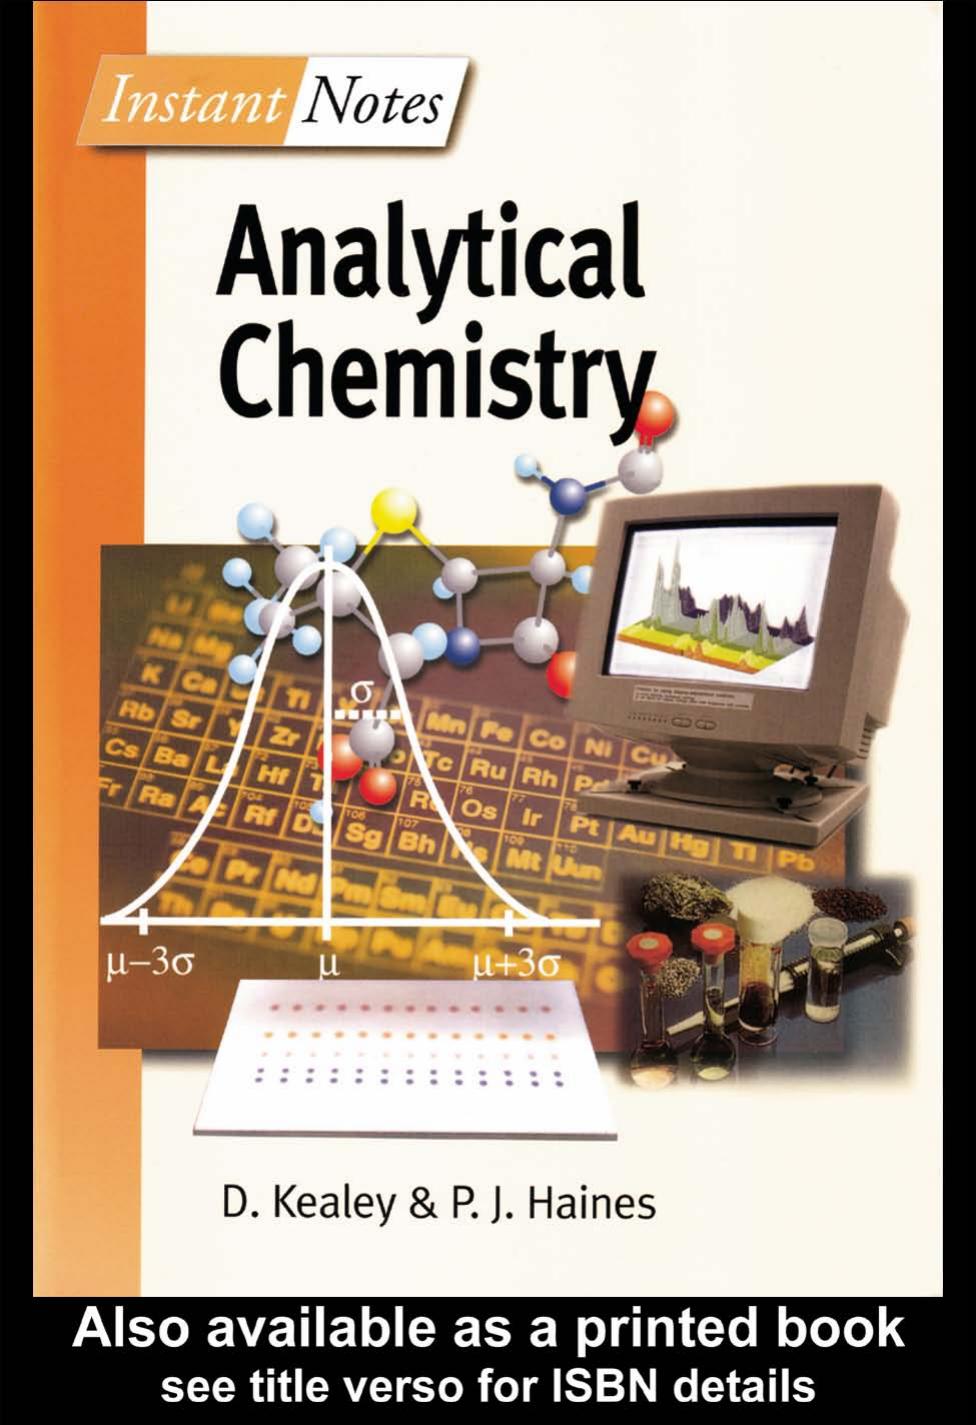 Instant Notes: Analytical Chemistry